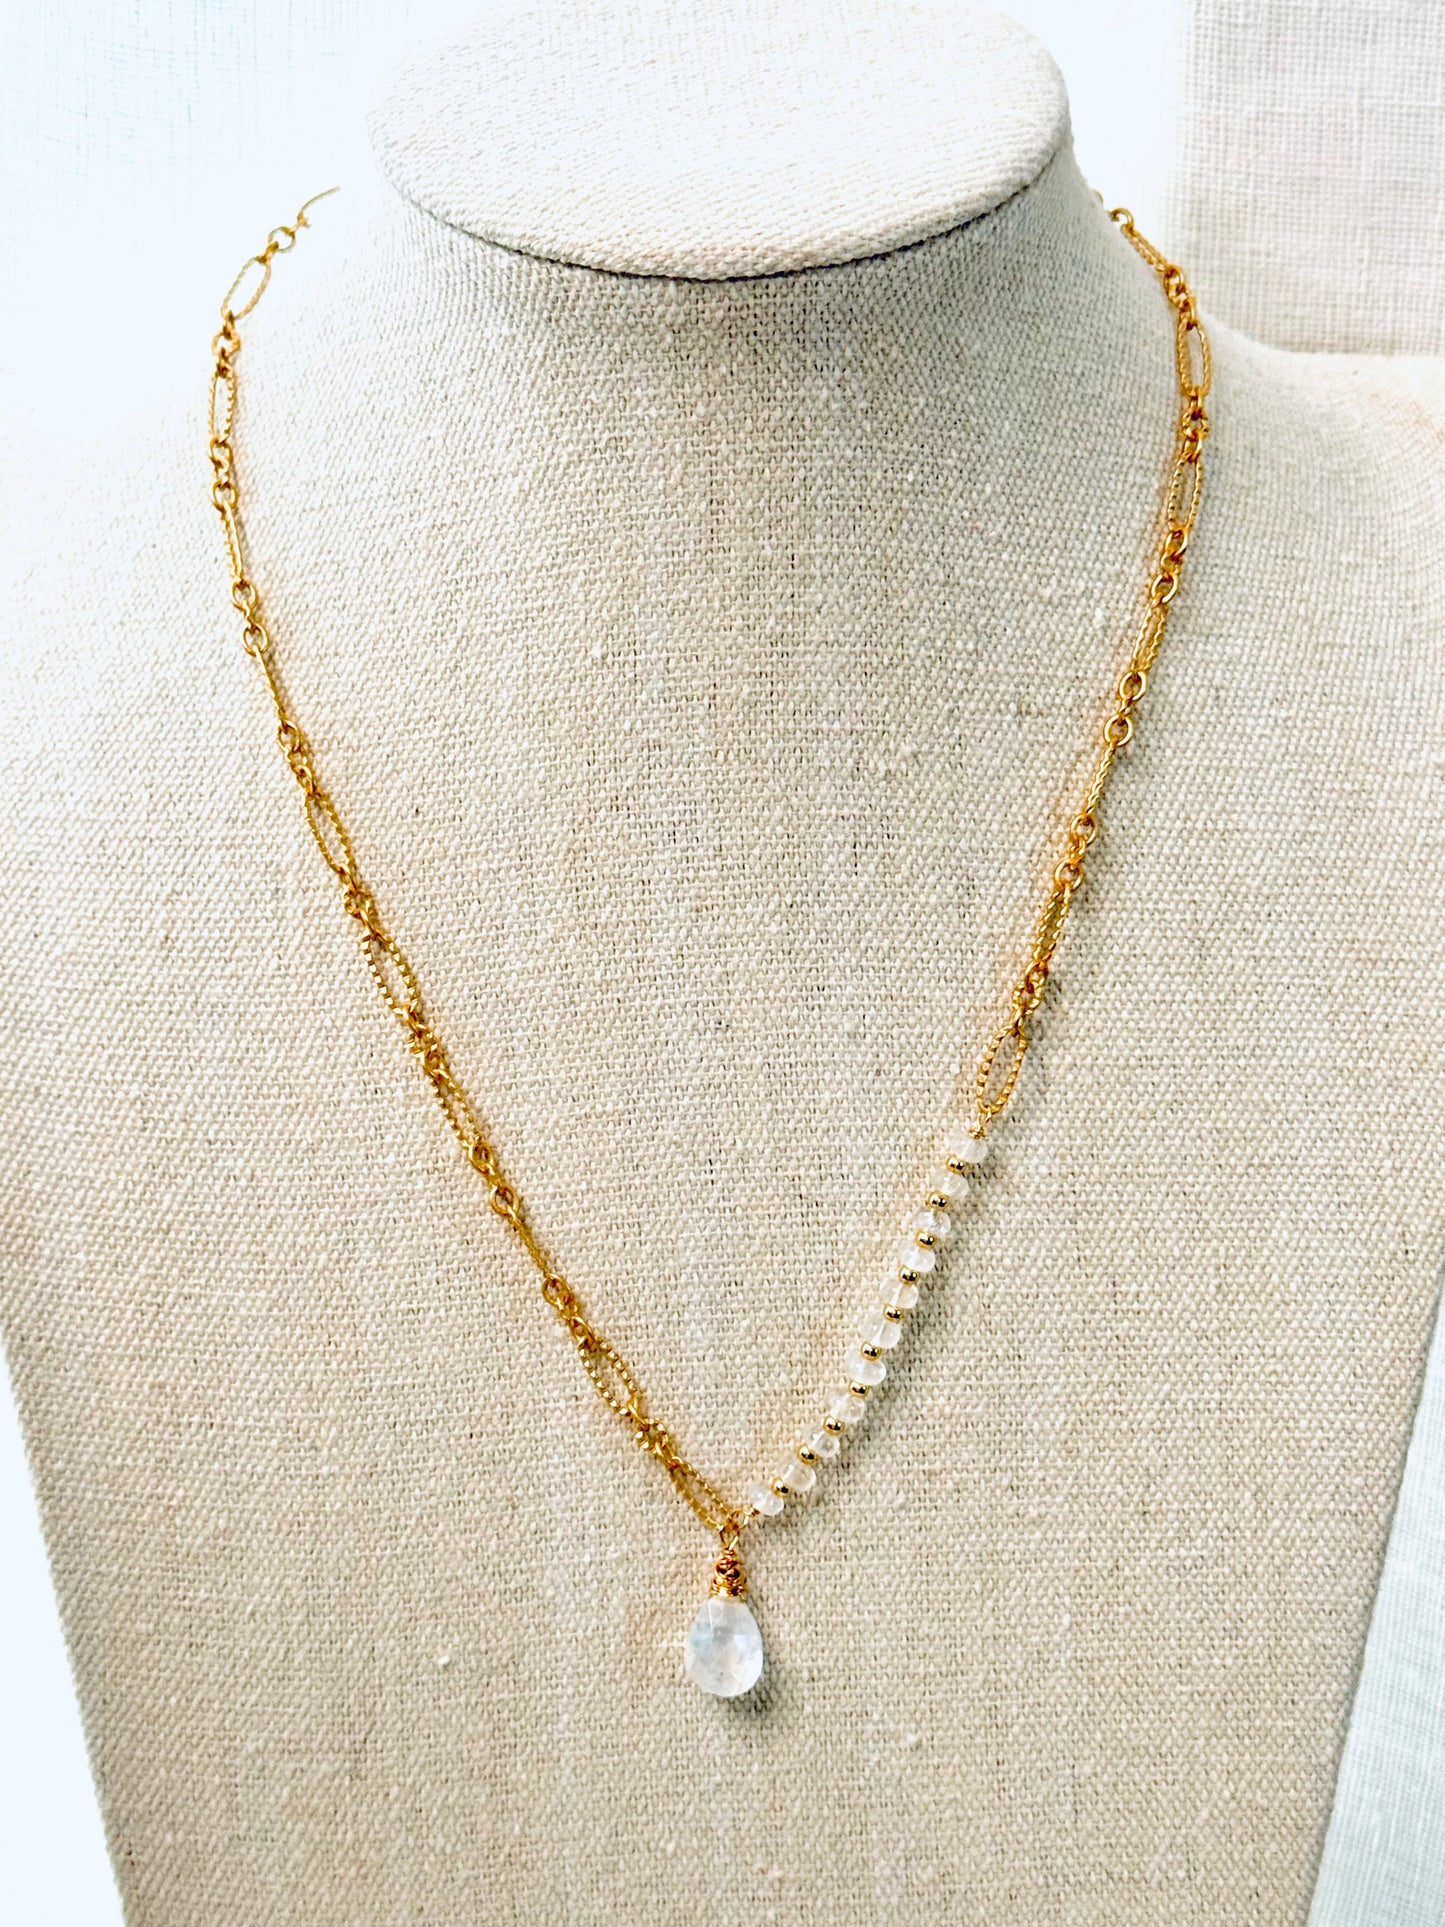 Rainbow Moonstone + Matte Gold Beaded Chain Necklace